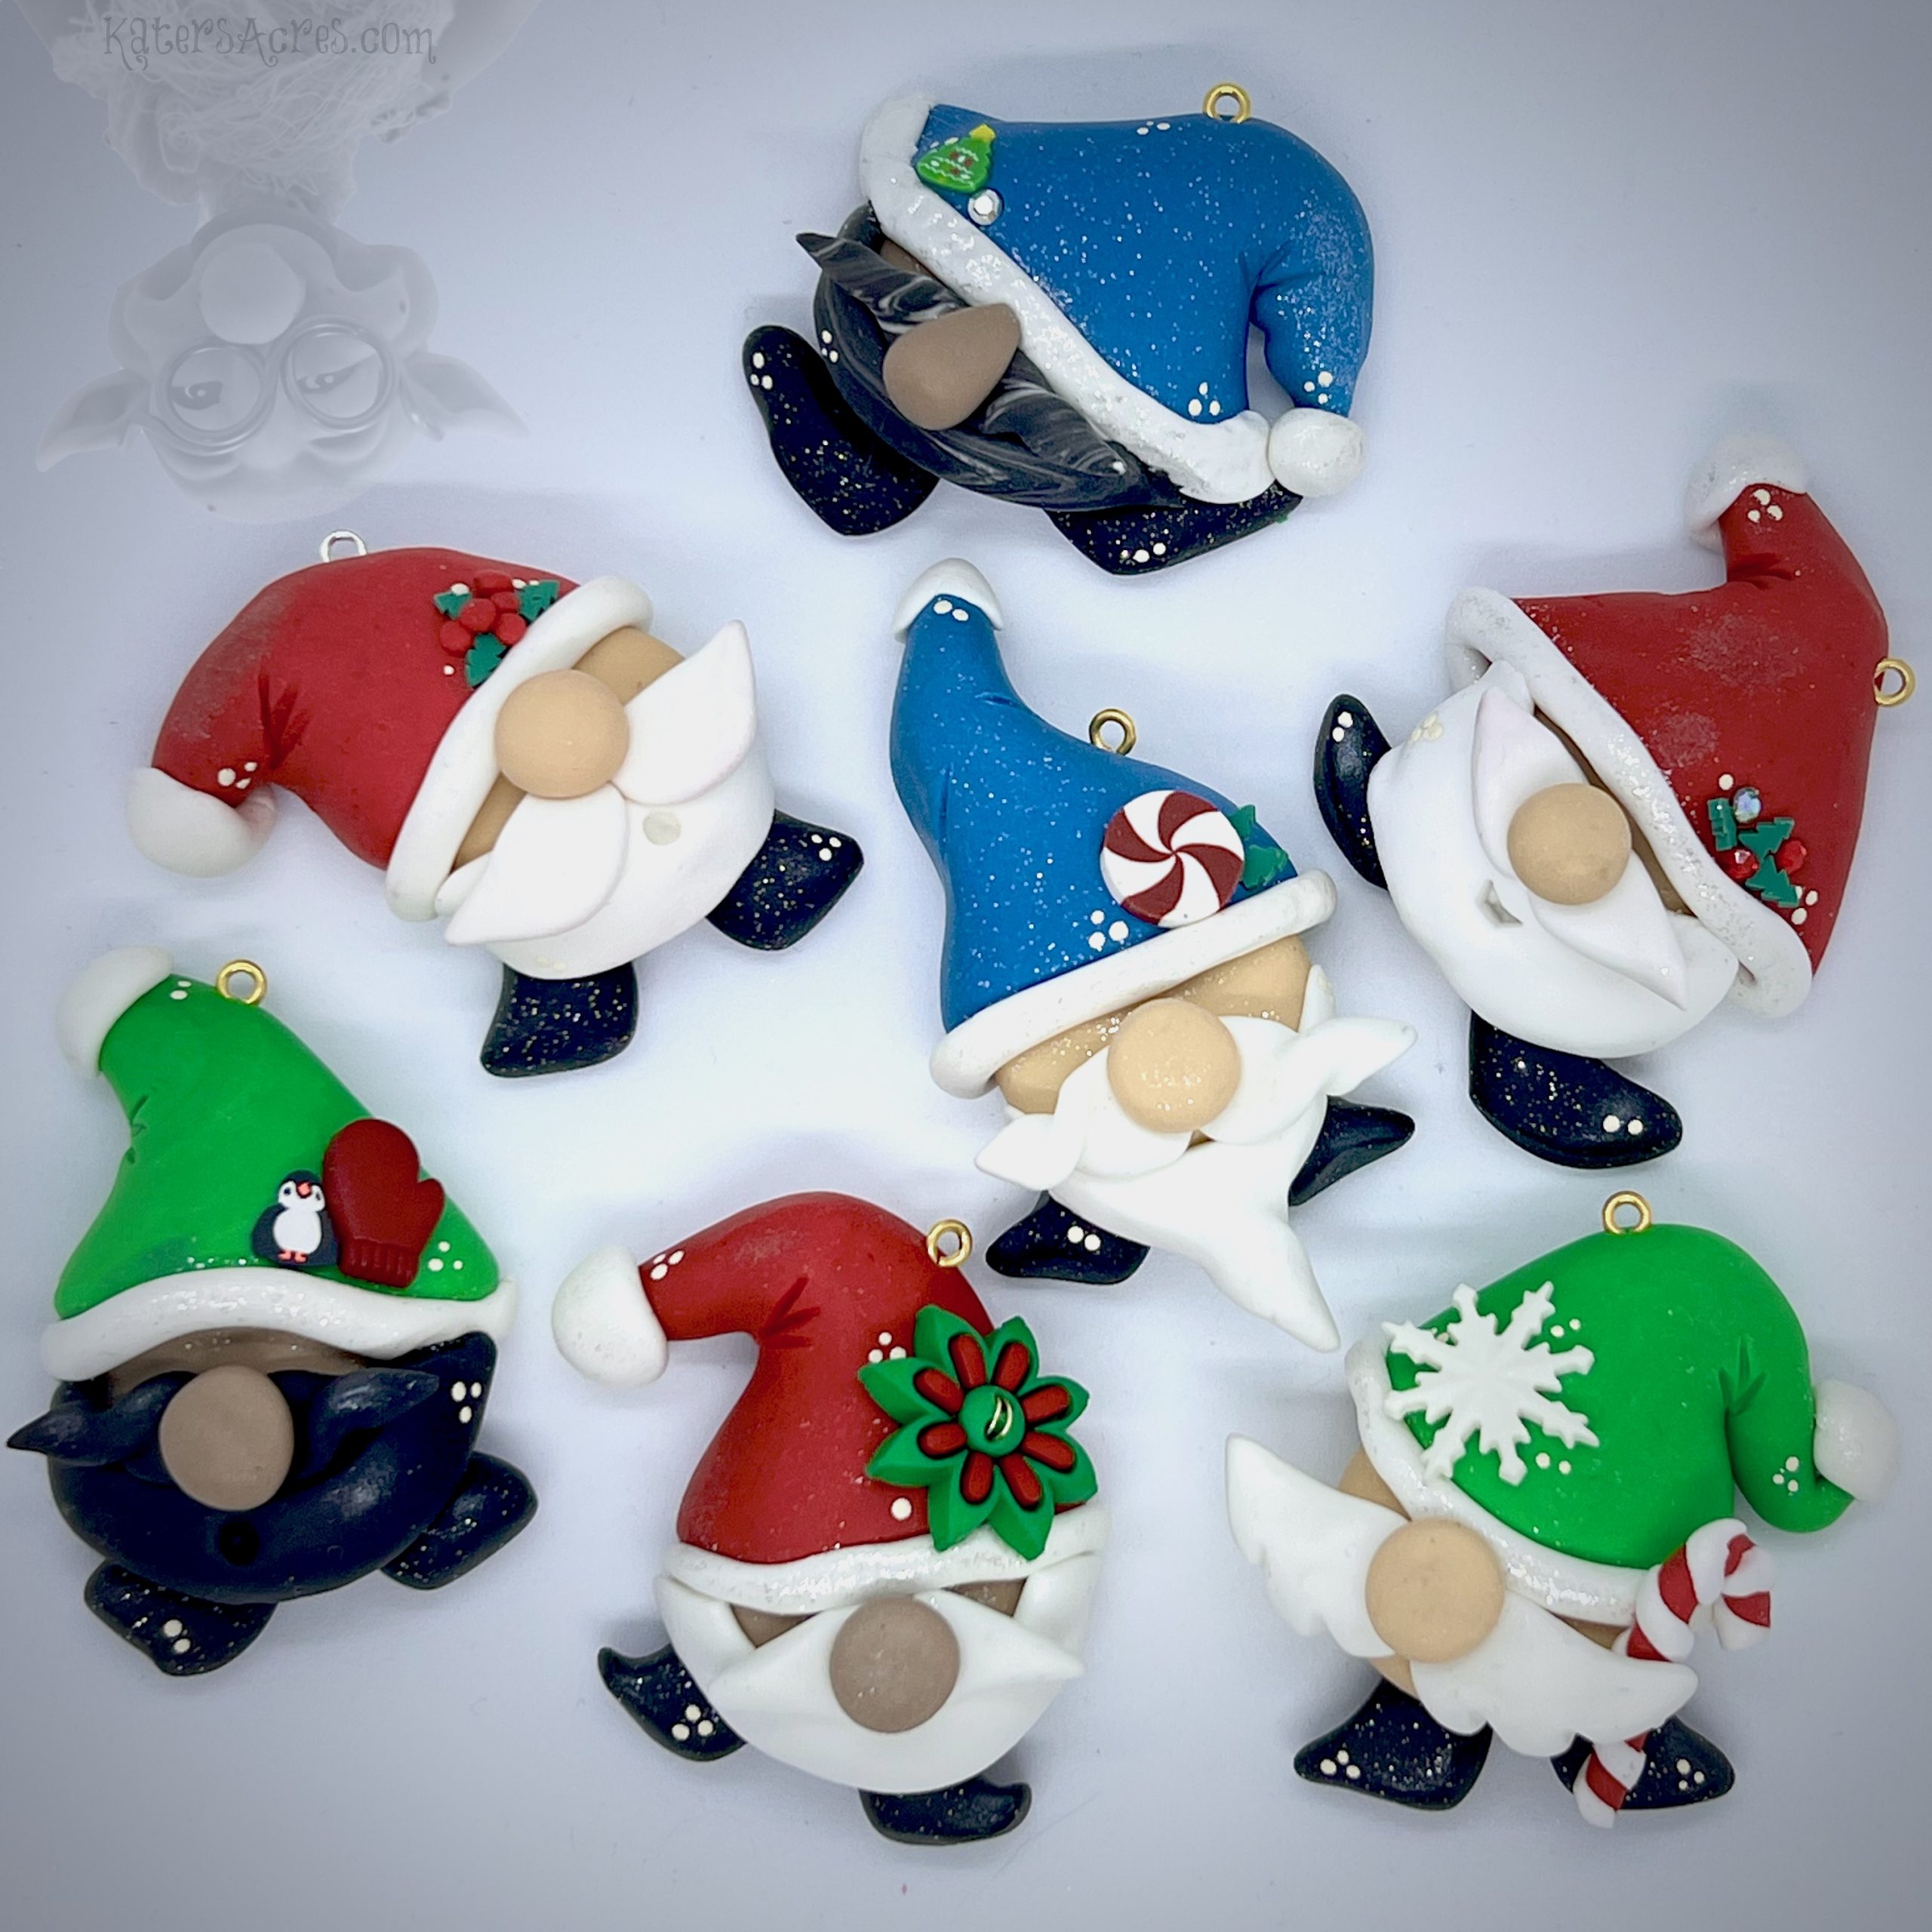 Santa Gnome Ornaments from Kater's Acres